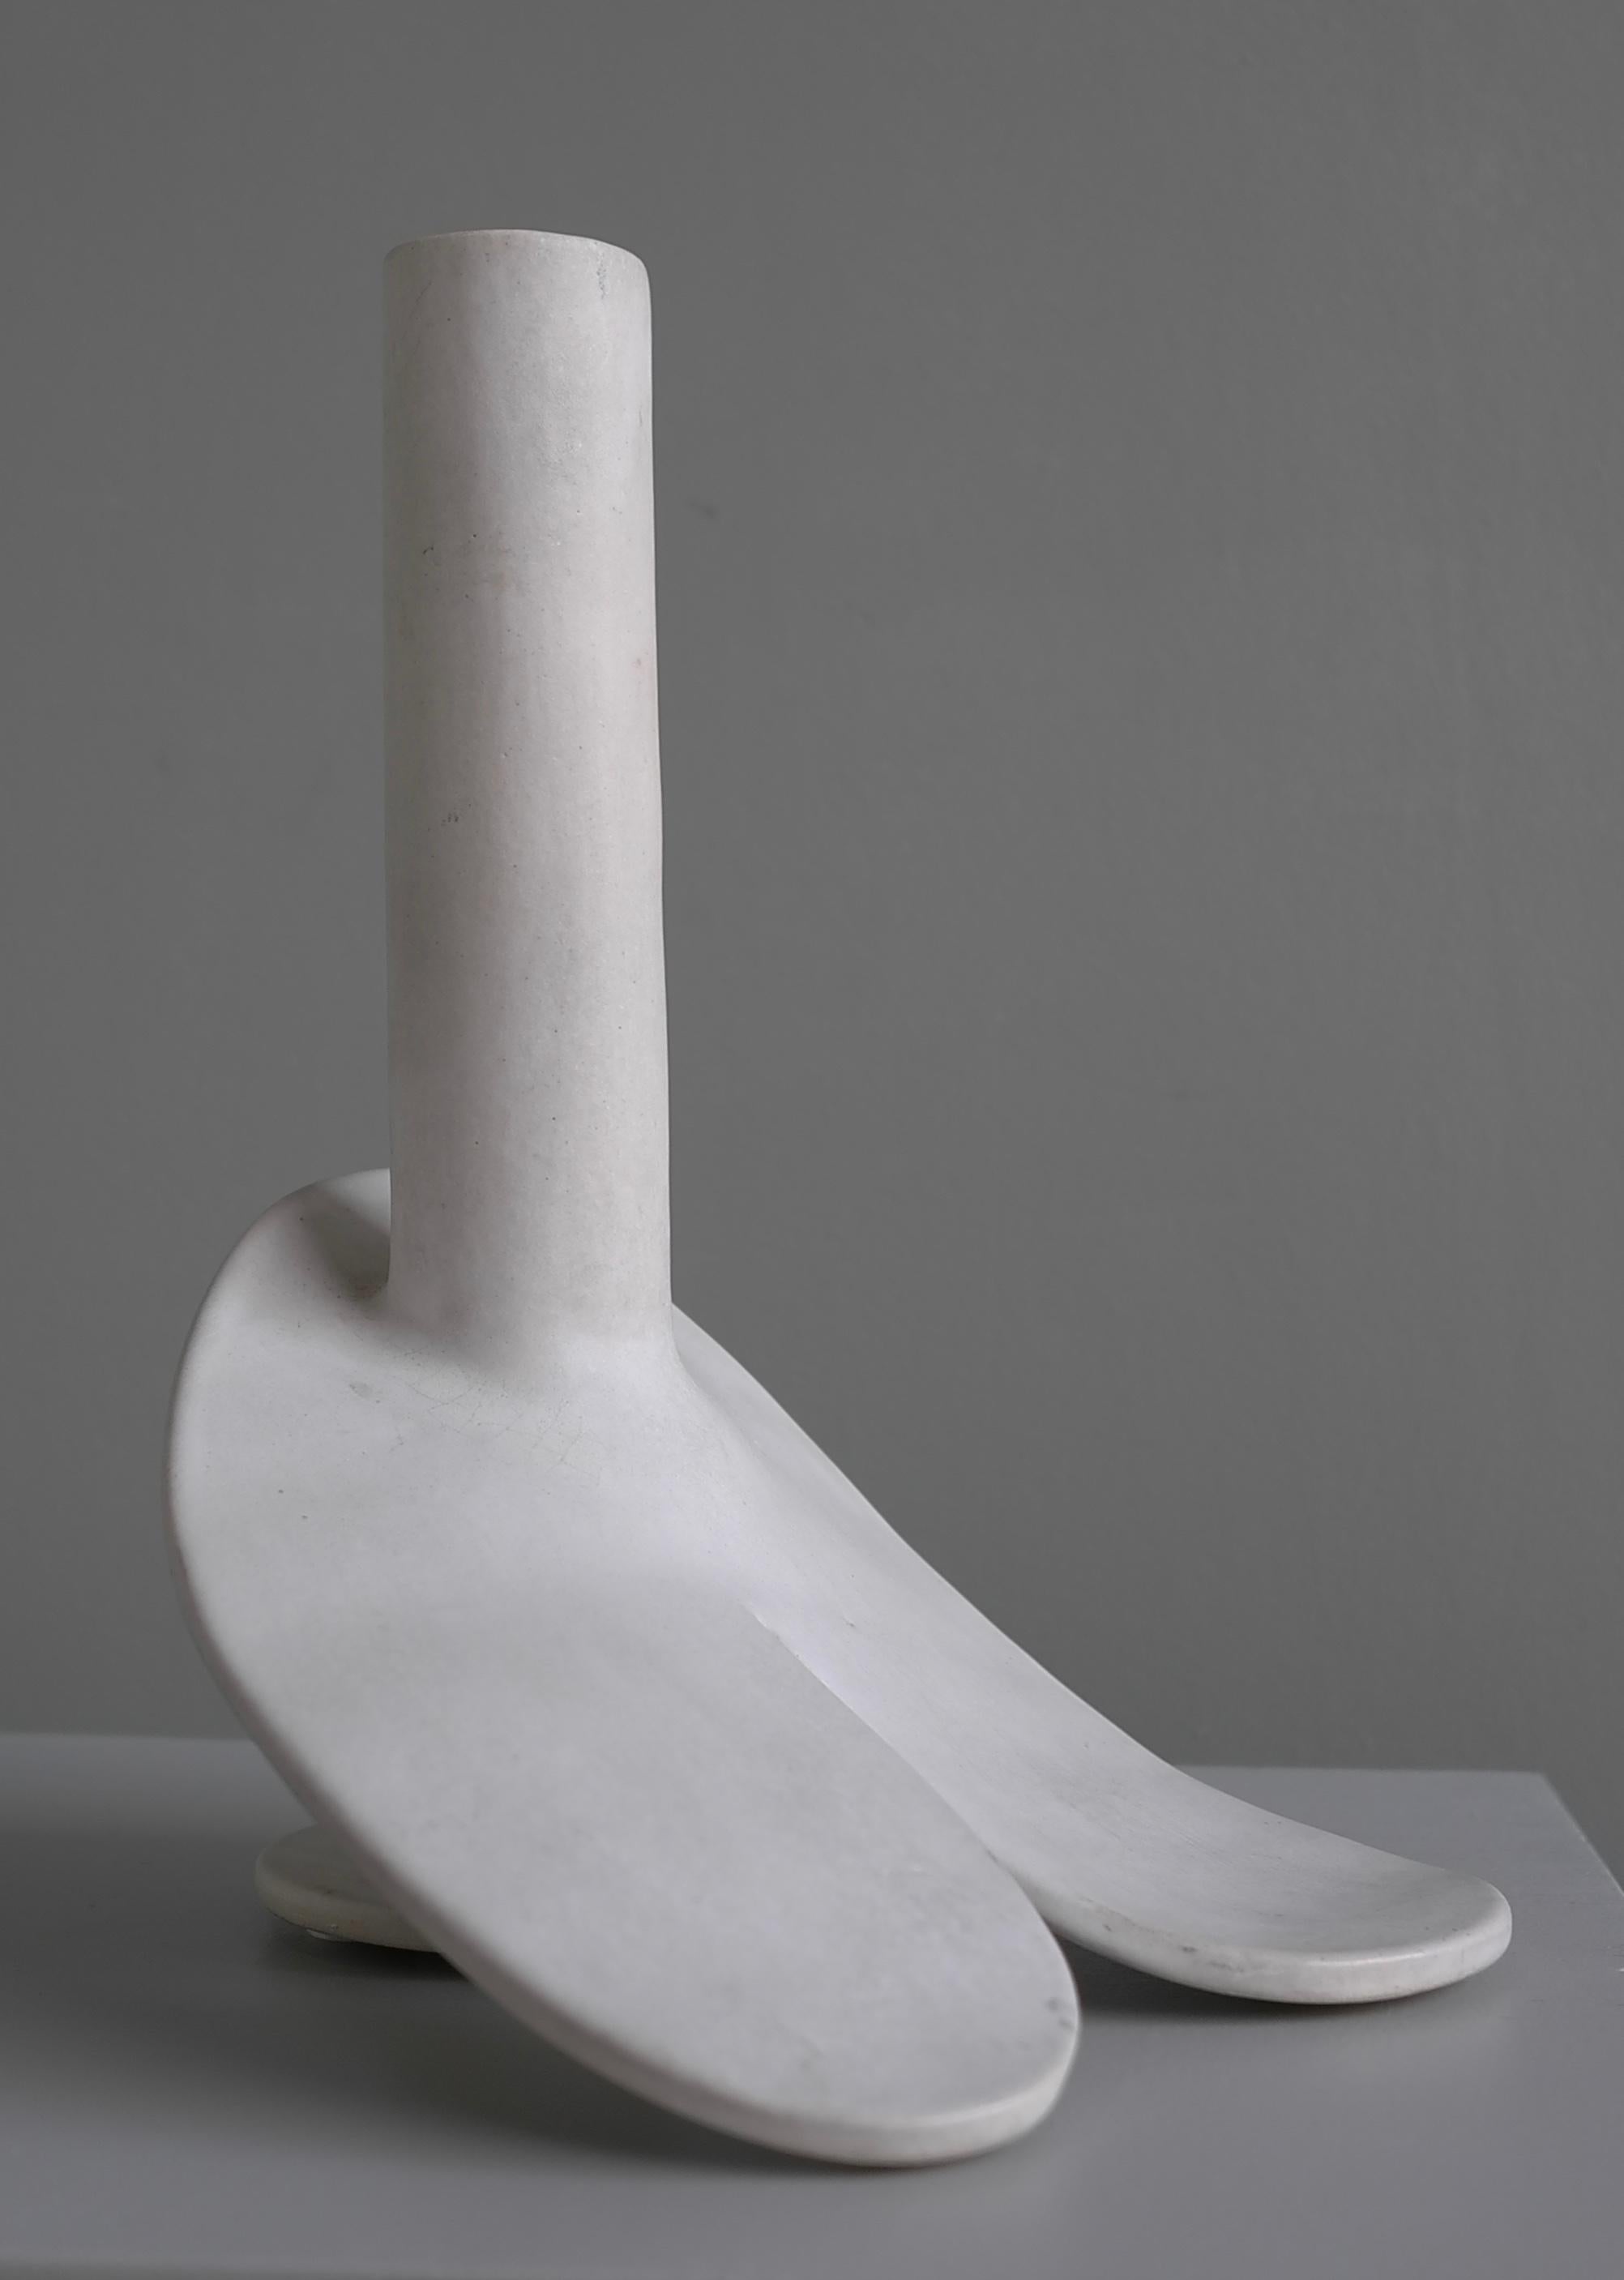 Abstract Mid-Century Modern White Glazed Phallus Sculpture, The Netherlands 1976 For Sale 7